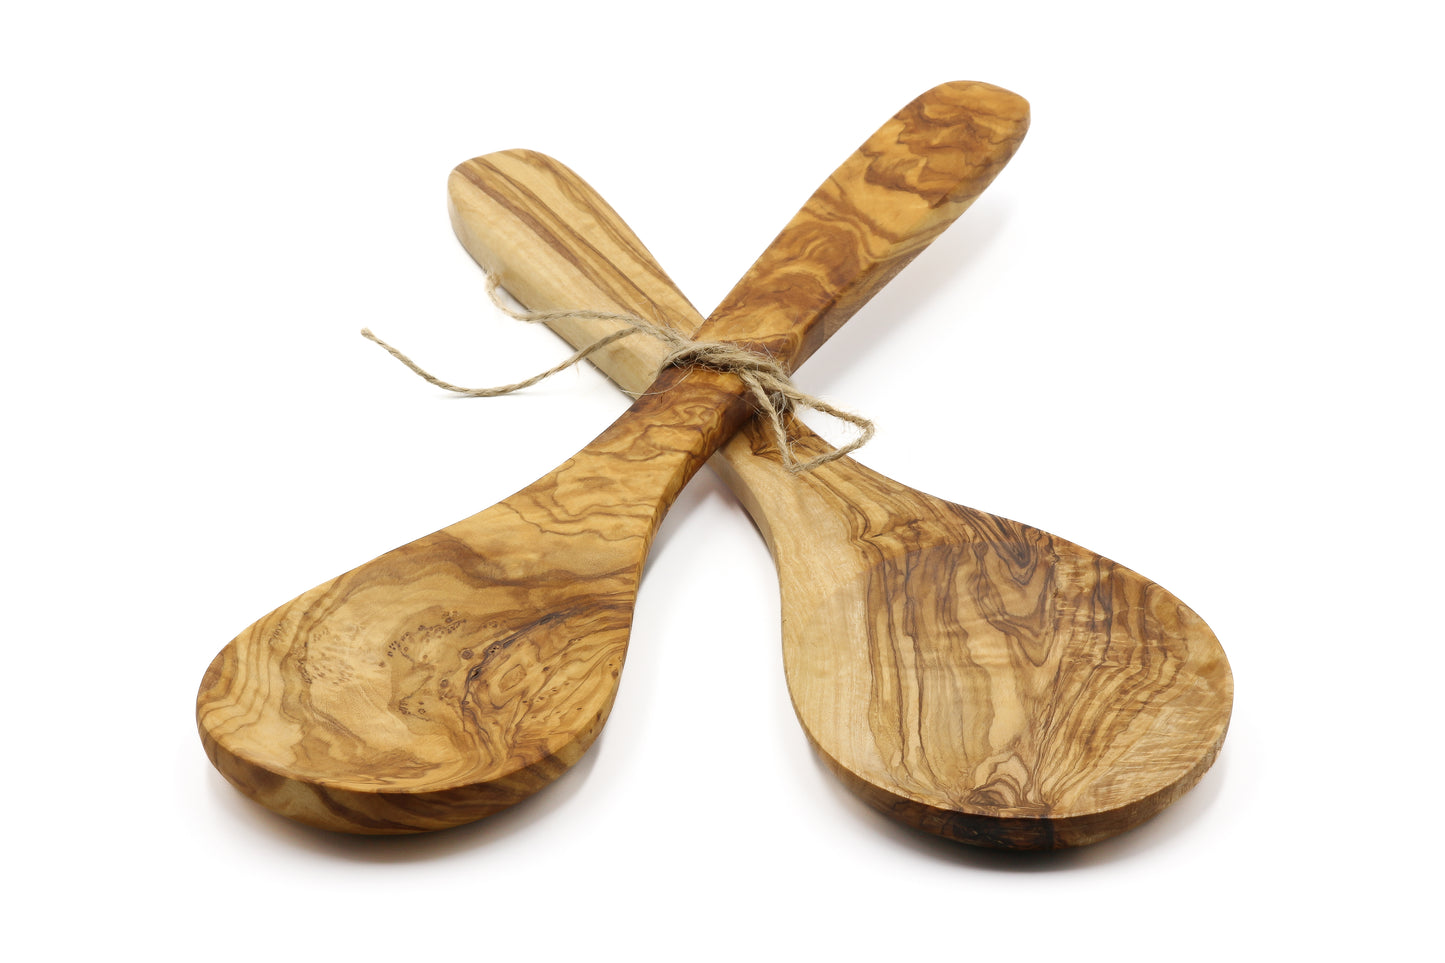 Olive wood wide scoop spoon, olive wood rice and potato server